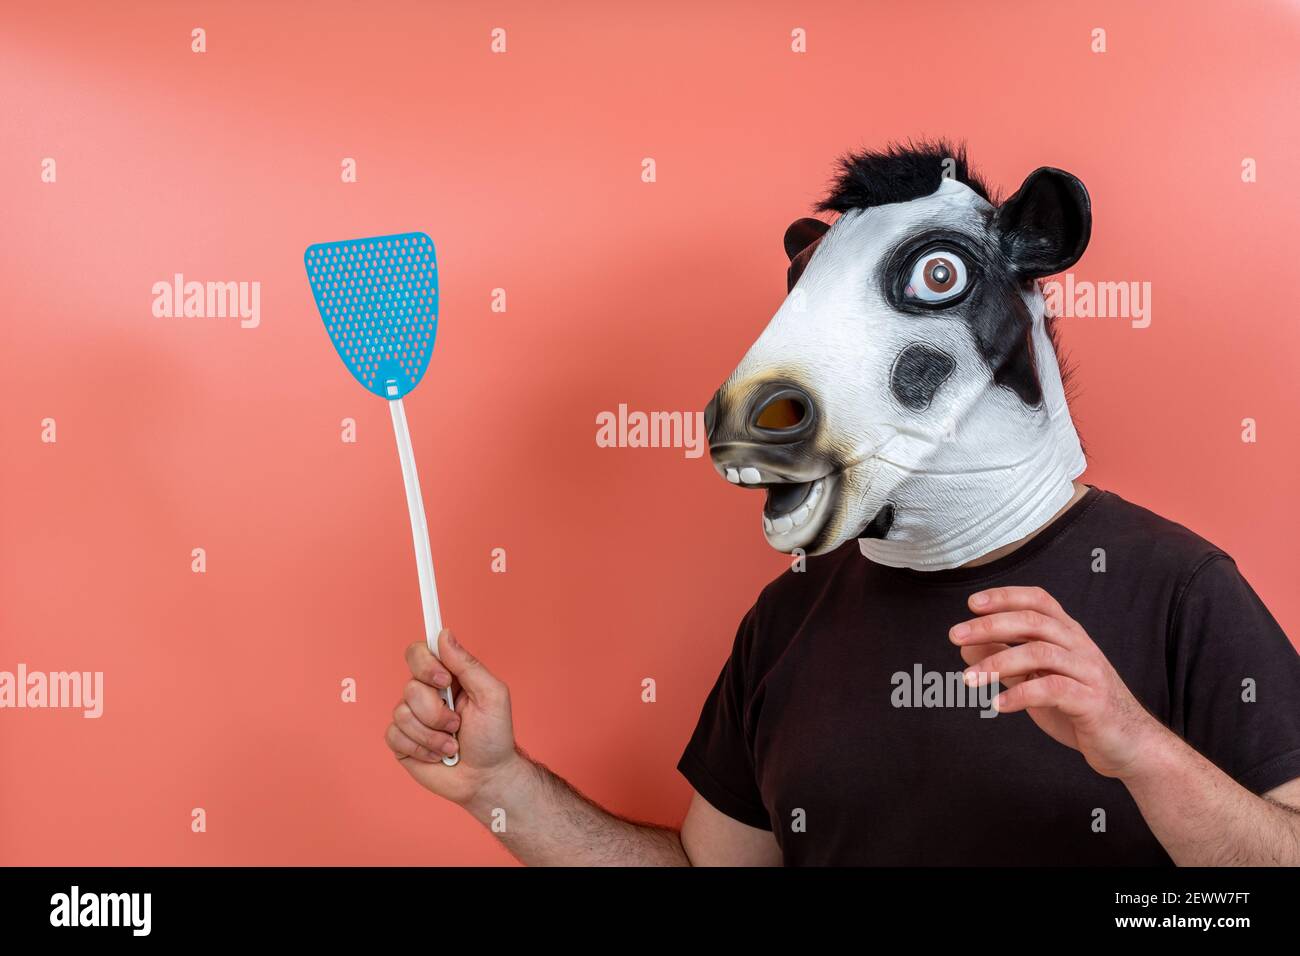 person disguised as a cow mask with a blue fly swatting shovel on a pink background Stock Photo